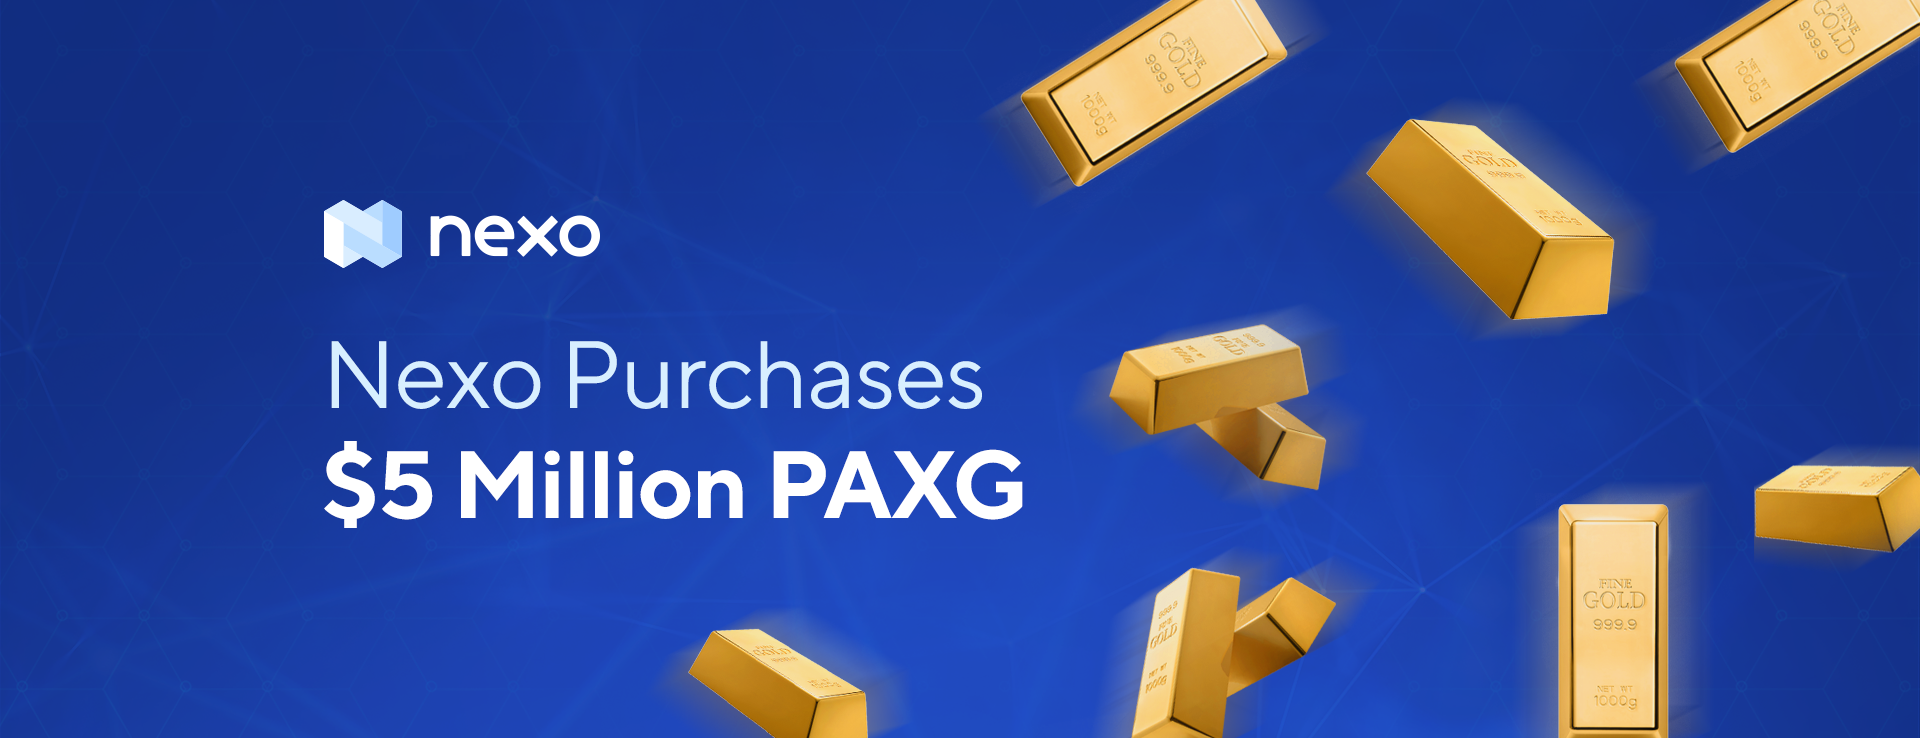 Nexo Purchases $5 Million in PAX Gold to Meet Demand for Tokenized Gold Lending and Borrowing